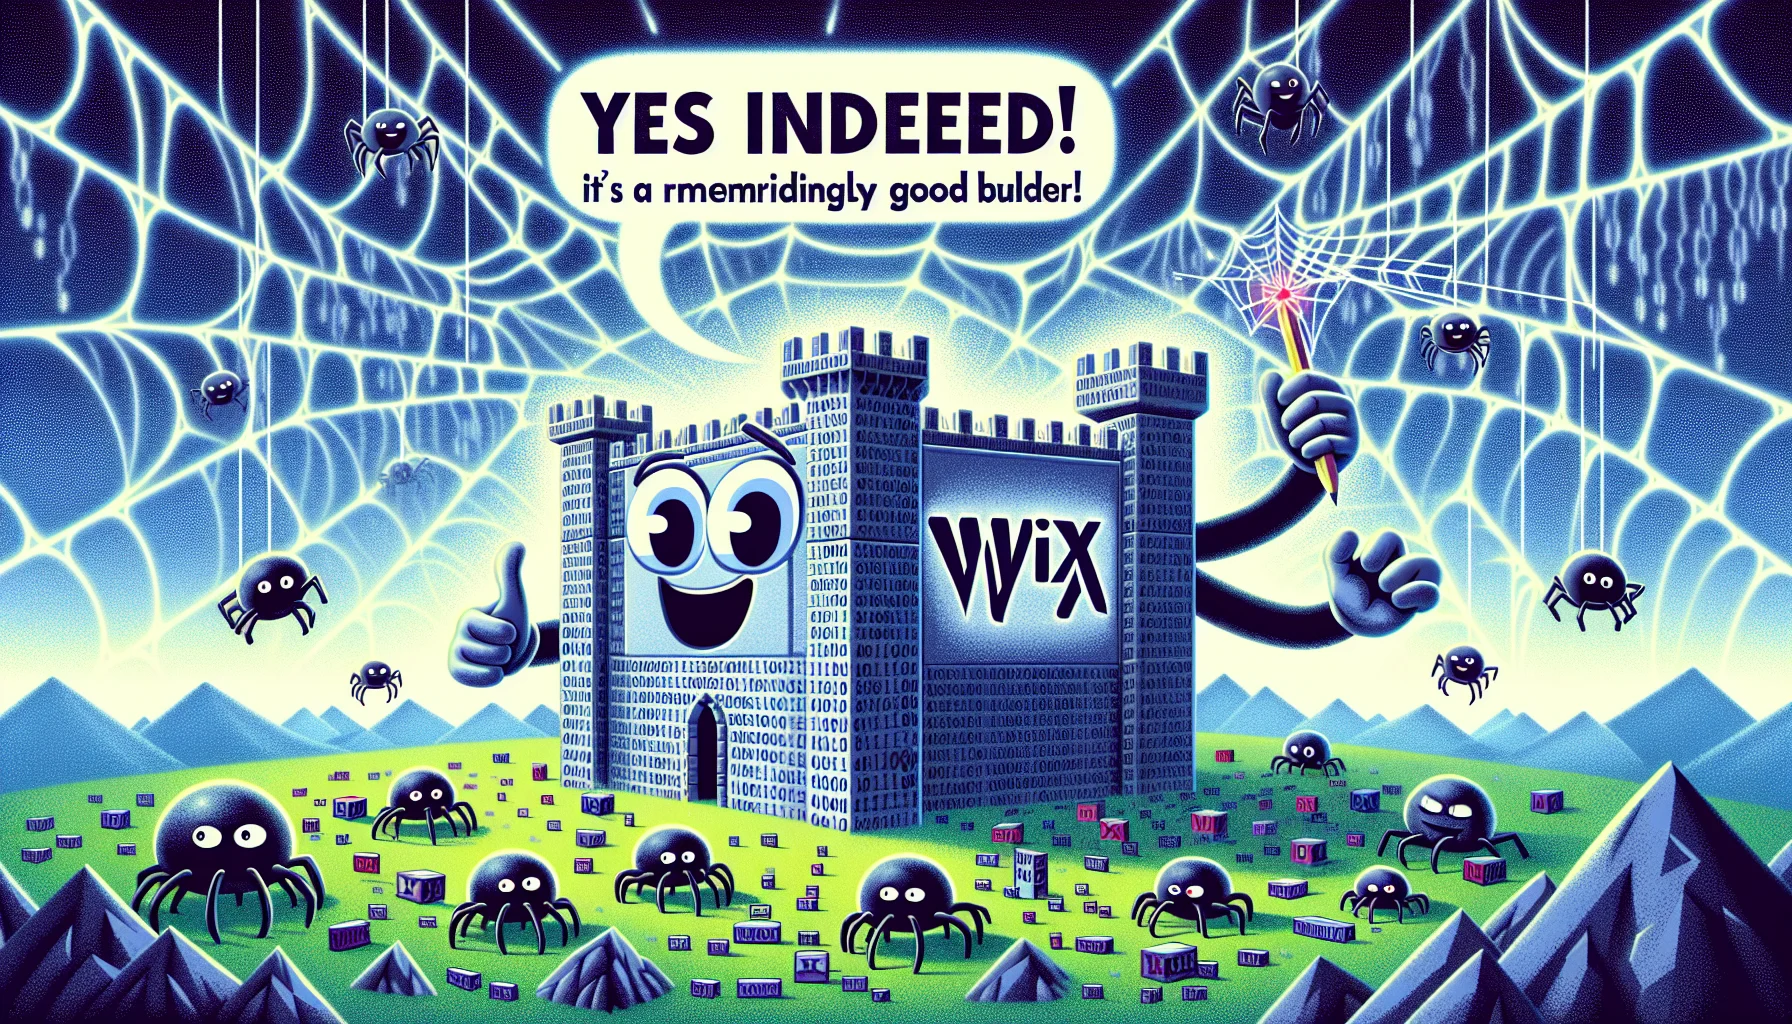 Create a comedic image demonstrating an anthropomorphic computer mascot, possessing attributes that represent high quality, flexibility, and ease-of-use, joyfully building a magnificent castle labeled 'Wix' on a virtual landscape. Surround the mascot are numerous 'web' spiders skillfully spinning webs that connect to the castle, symbolizing robust web hosting. The sky is teeming with binary code rain, symbolizing the flow of data and information. The overall tone expresses a positive affirmation that yes indeed, 'Wix' is a remarkably good website builder.